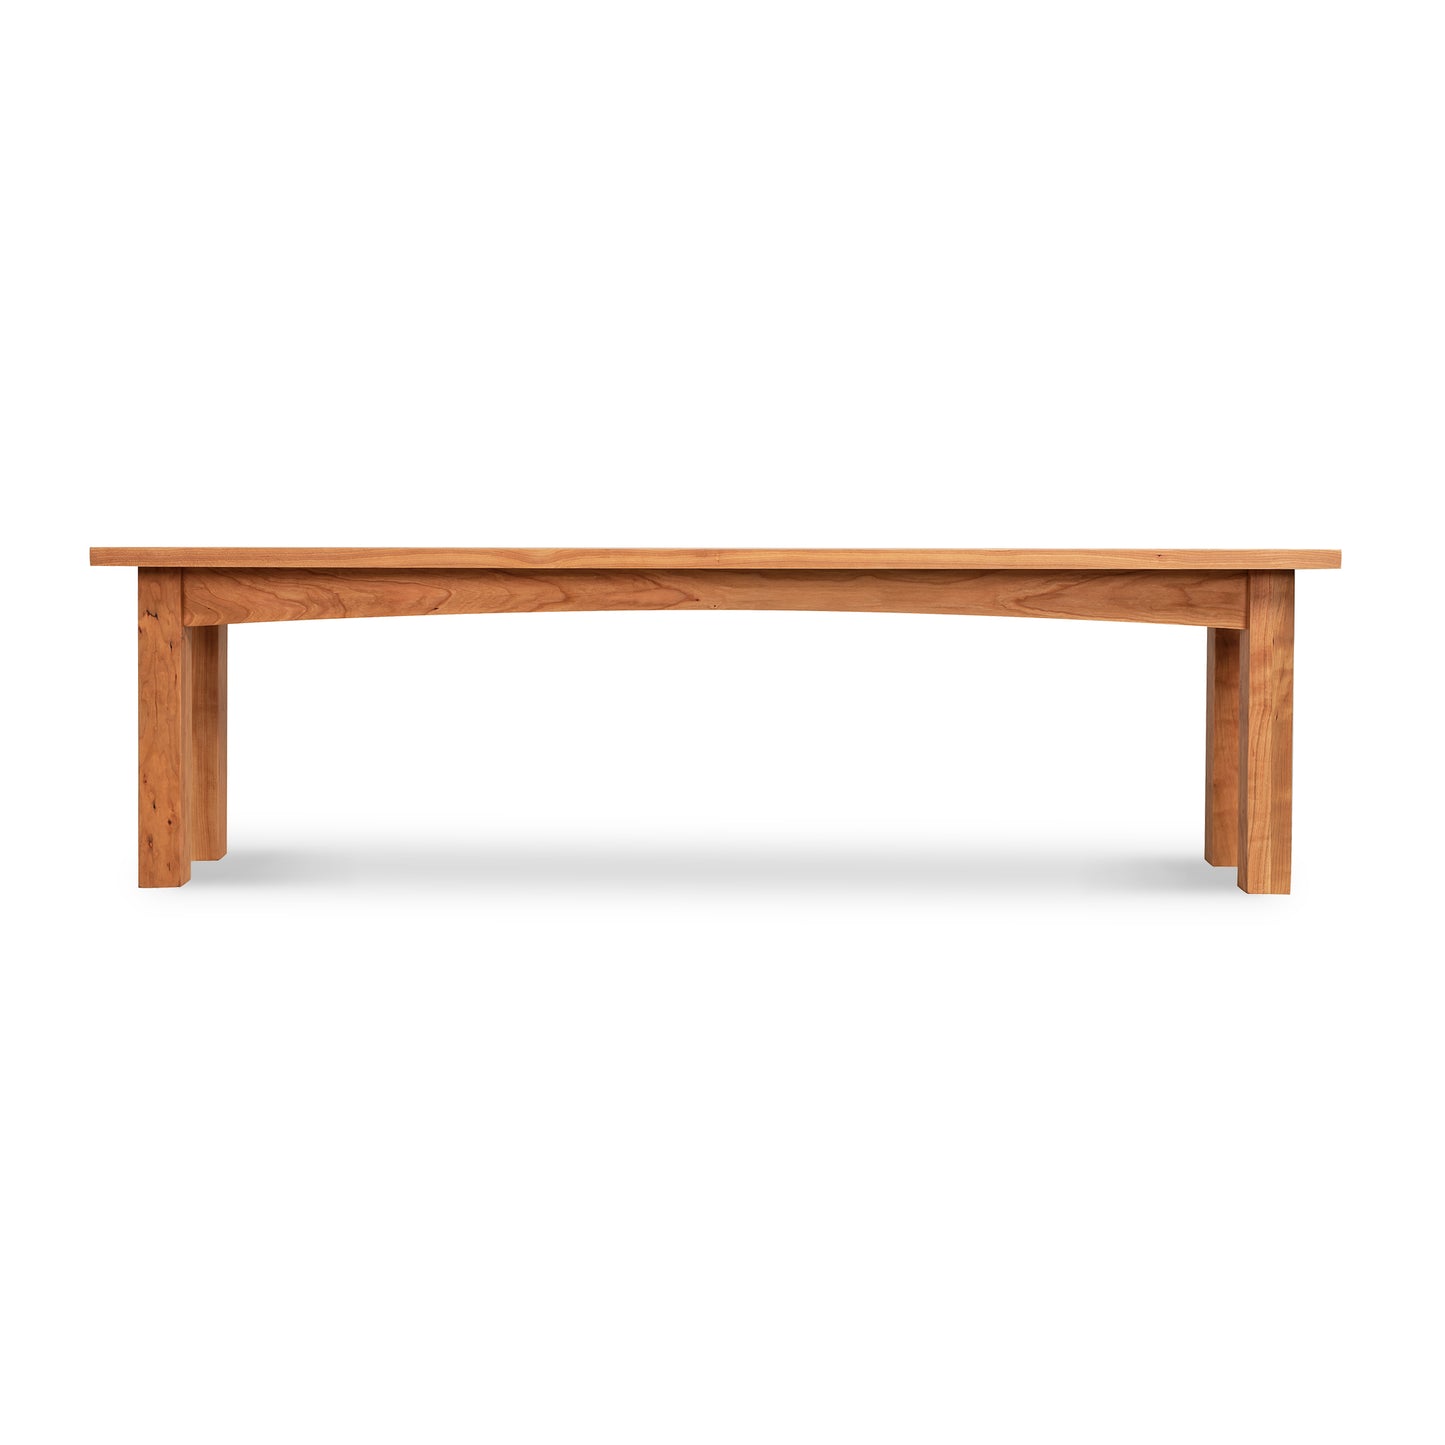 A Burlington Shaker Bench by Vermont Furniture Designs on a white background.